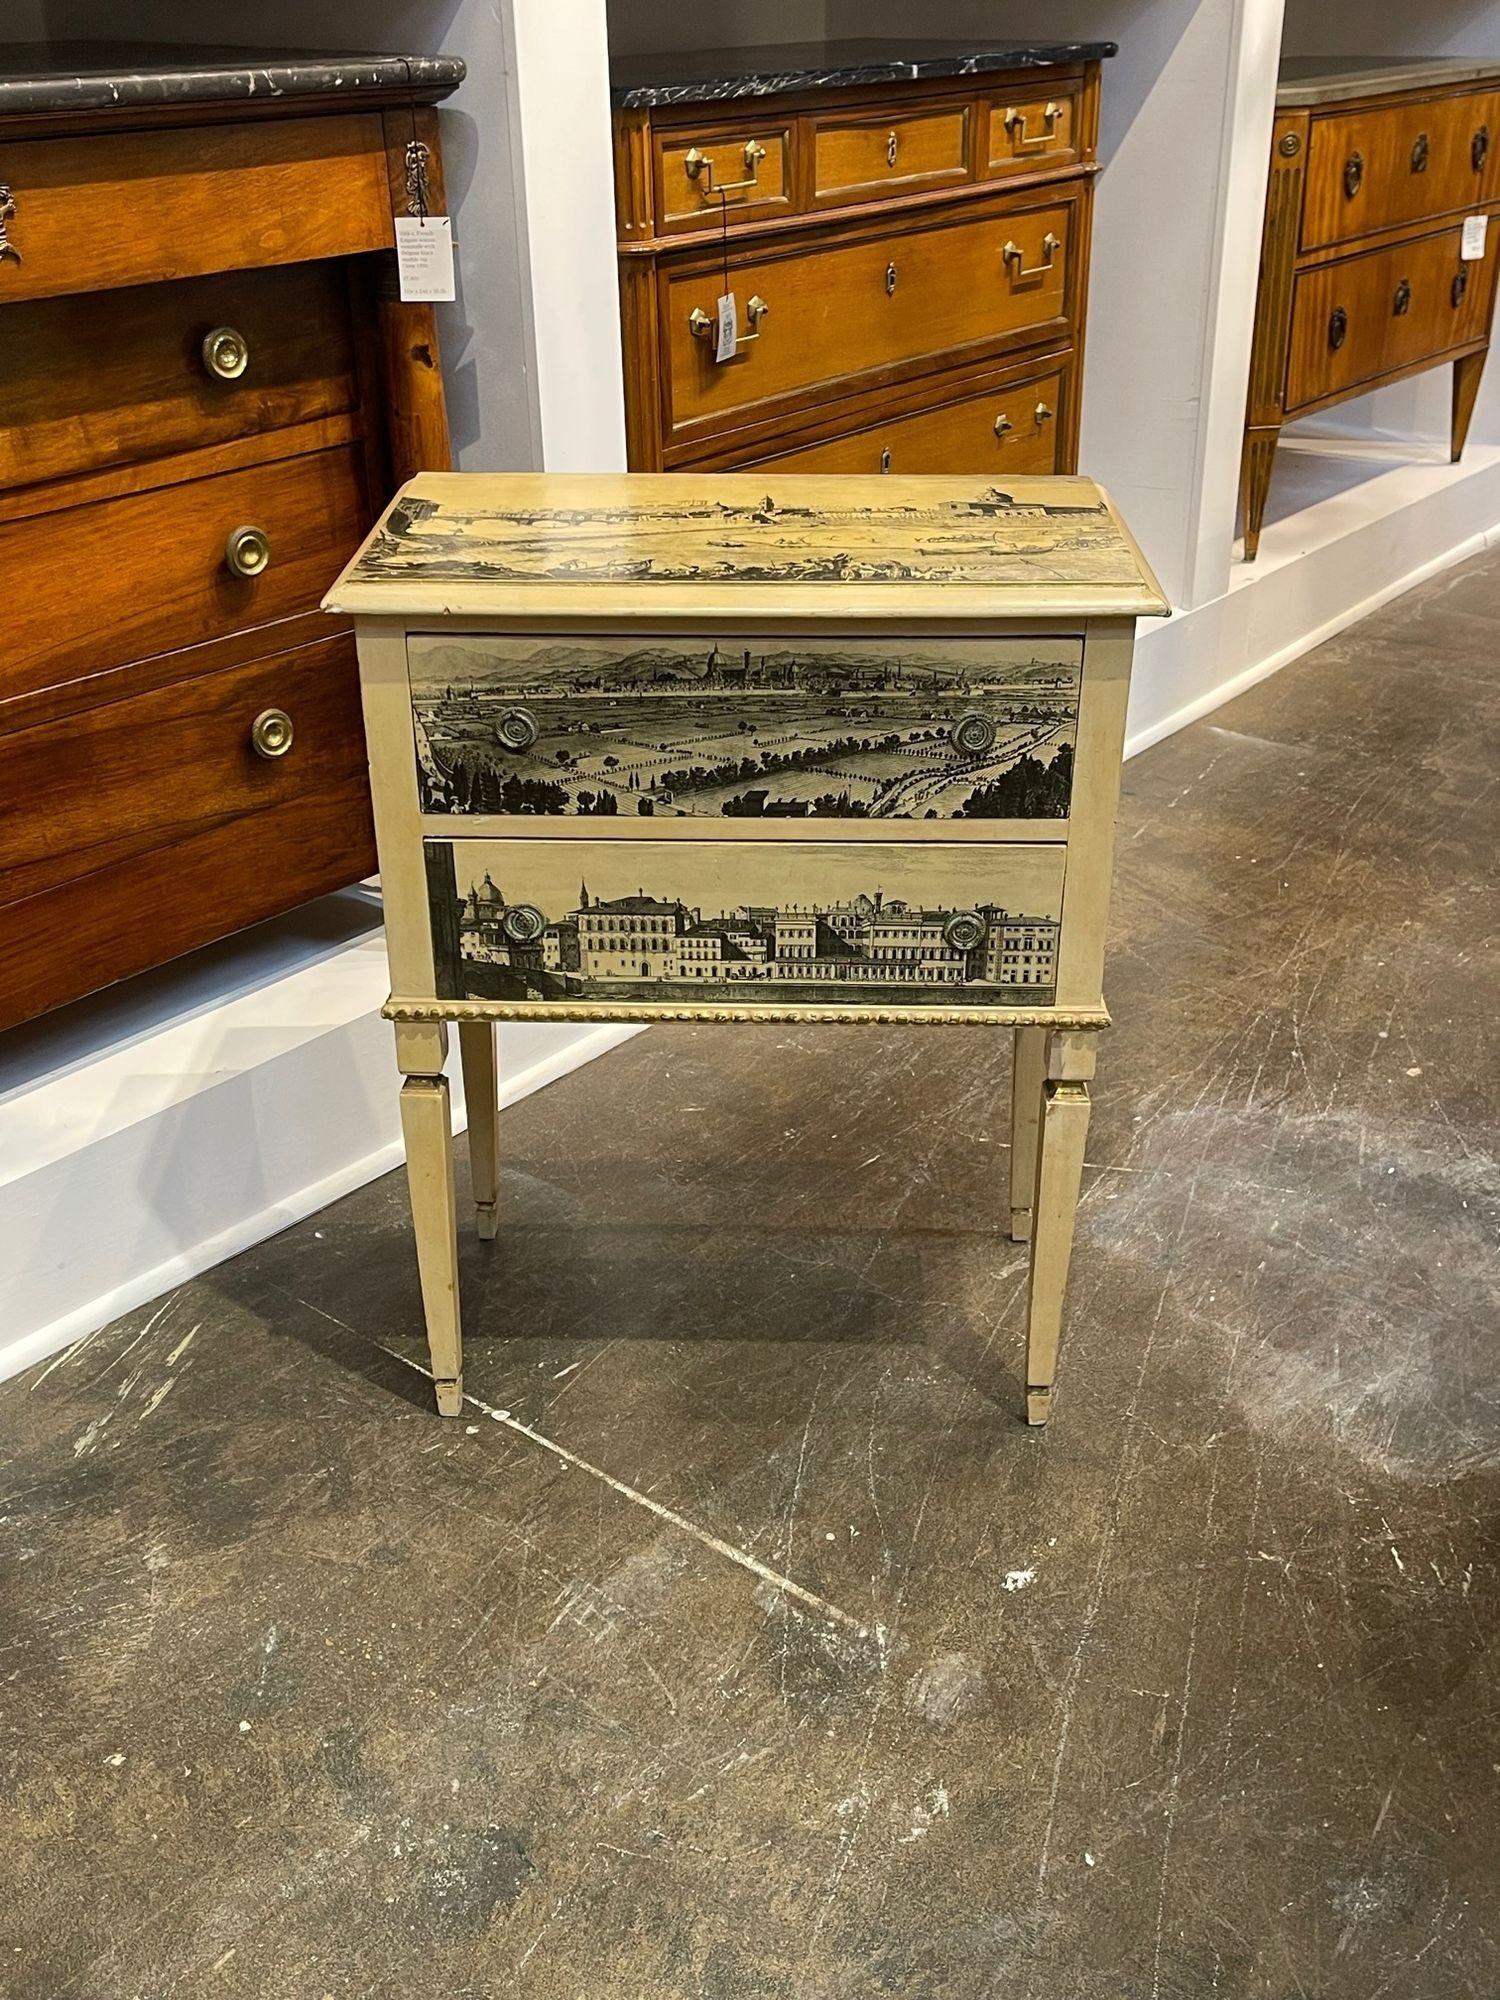 Very unique vintage Italian Fornasetti style side table. Features scenes from an ancient city. A true work of art that is a real conversation piece. Amazing!